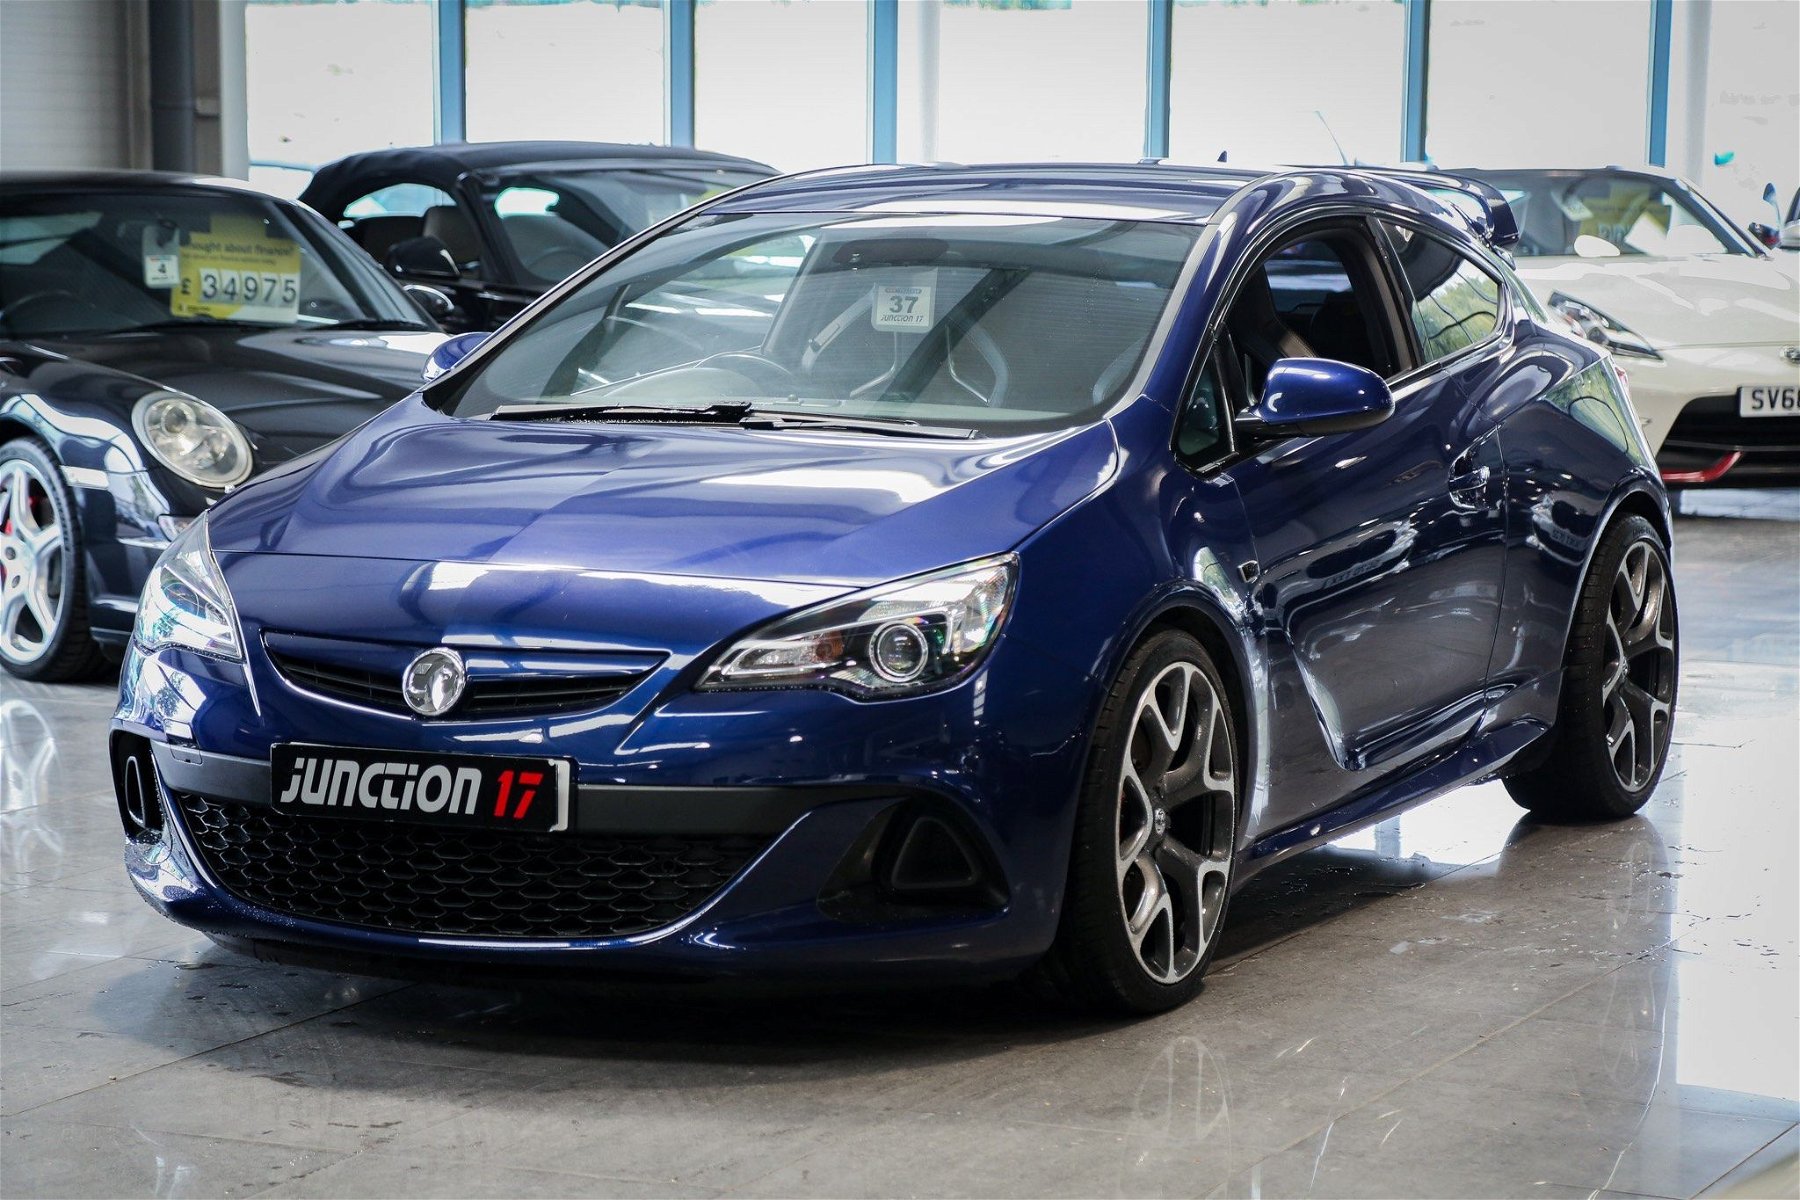 Vauxhall Astra Gtc for sale in Peterborough - Part Exchange Welcome